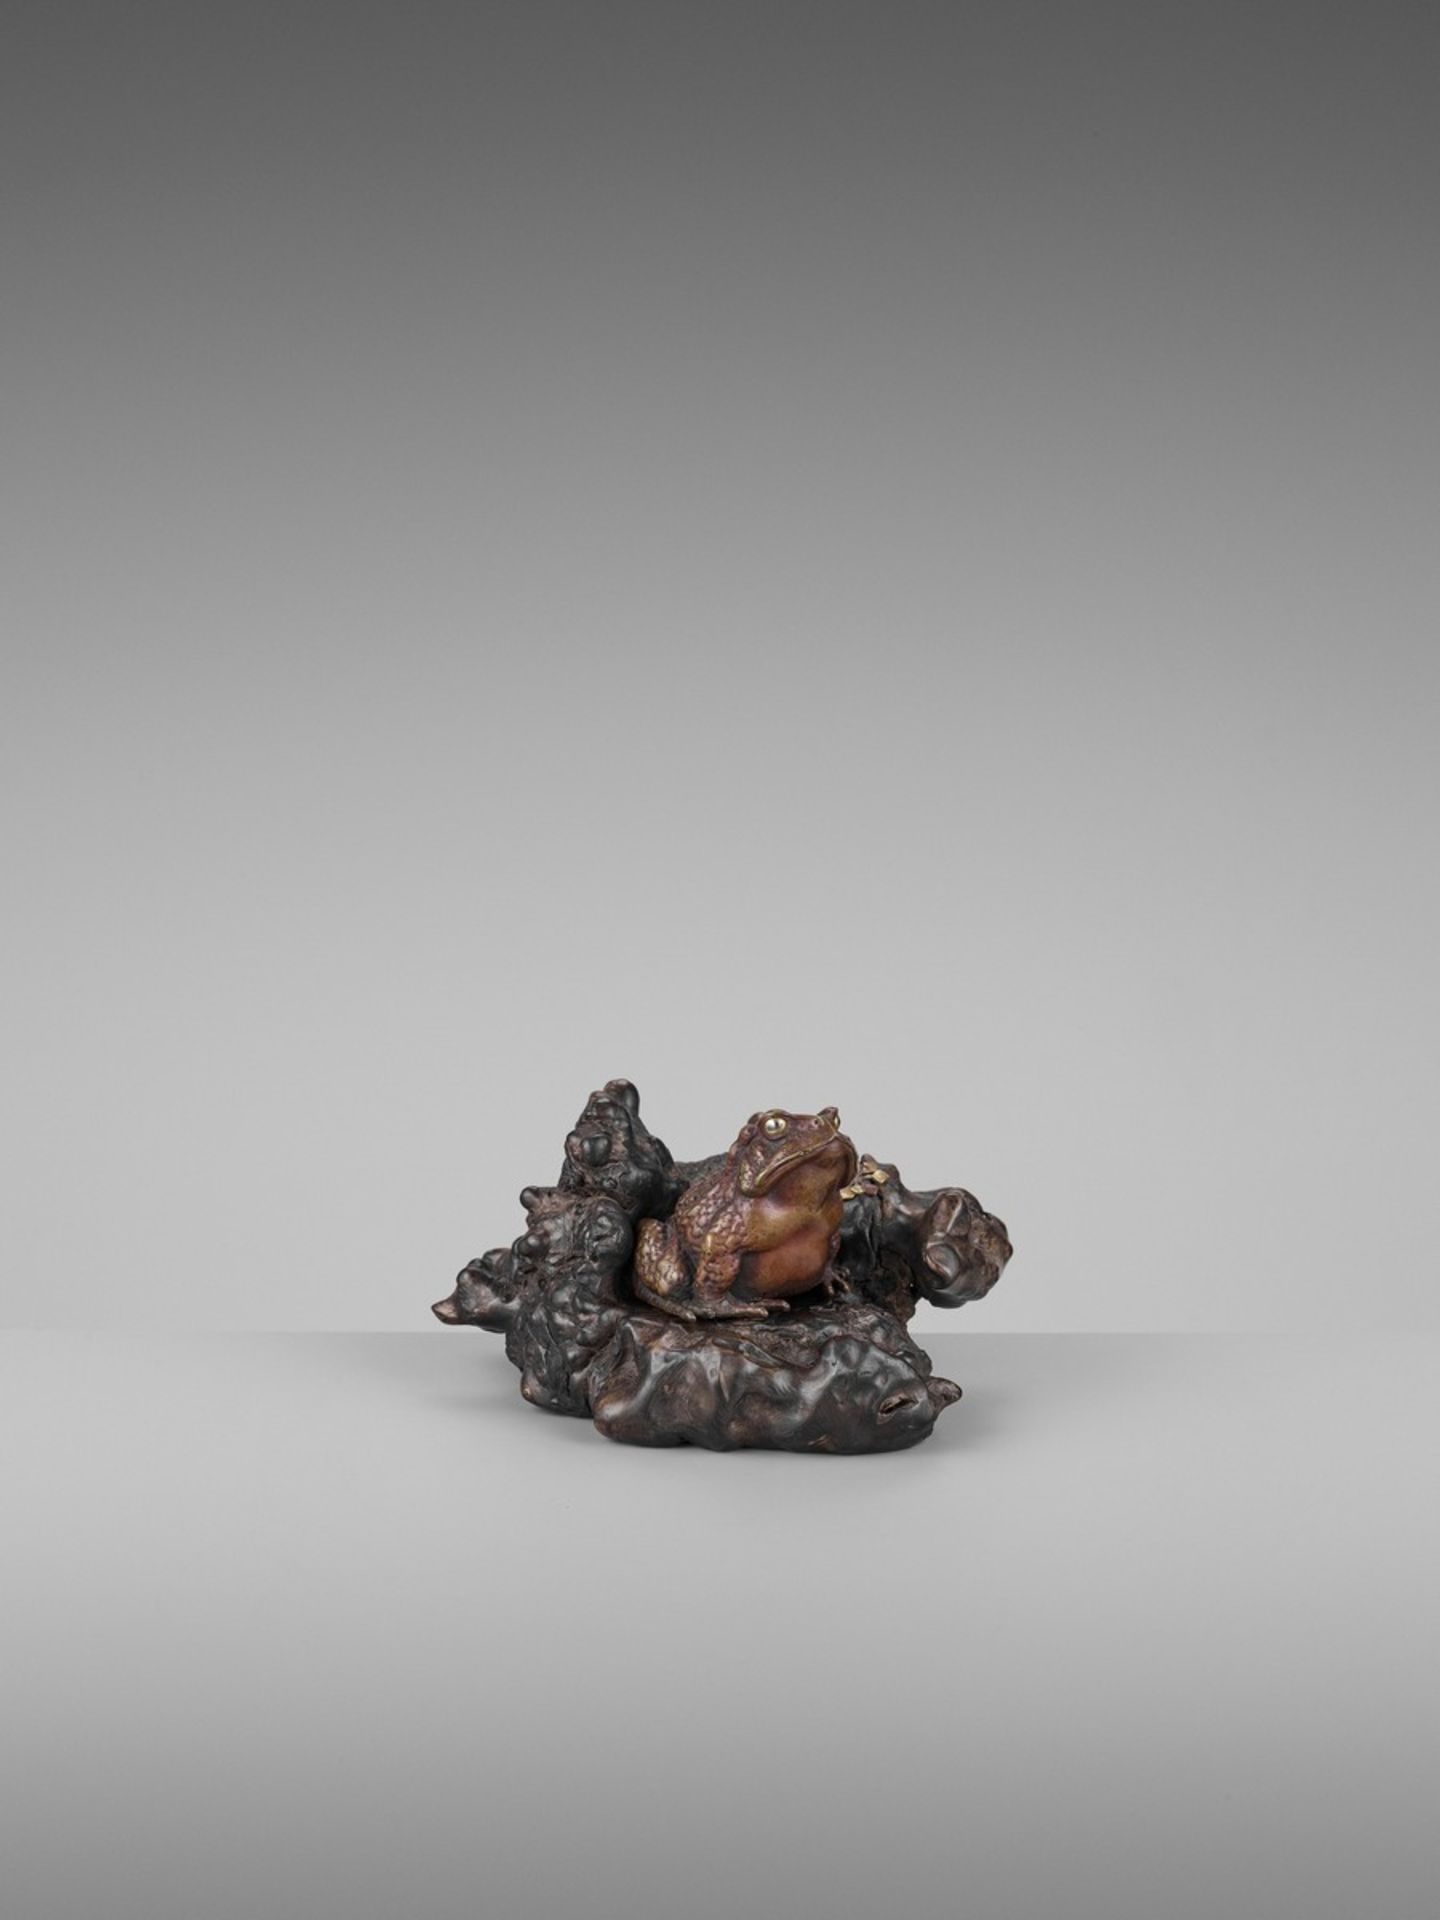 A FINE PARCEL-GILT BRONZE AND ROOT WOOD OKIMONO OF A TOAD Japan, Meiji period (1868-1912)The toad